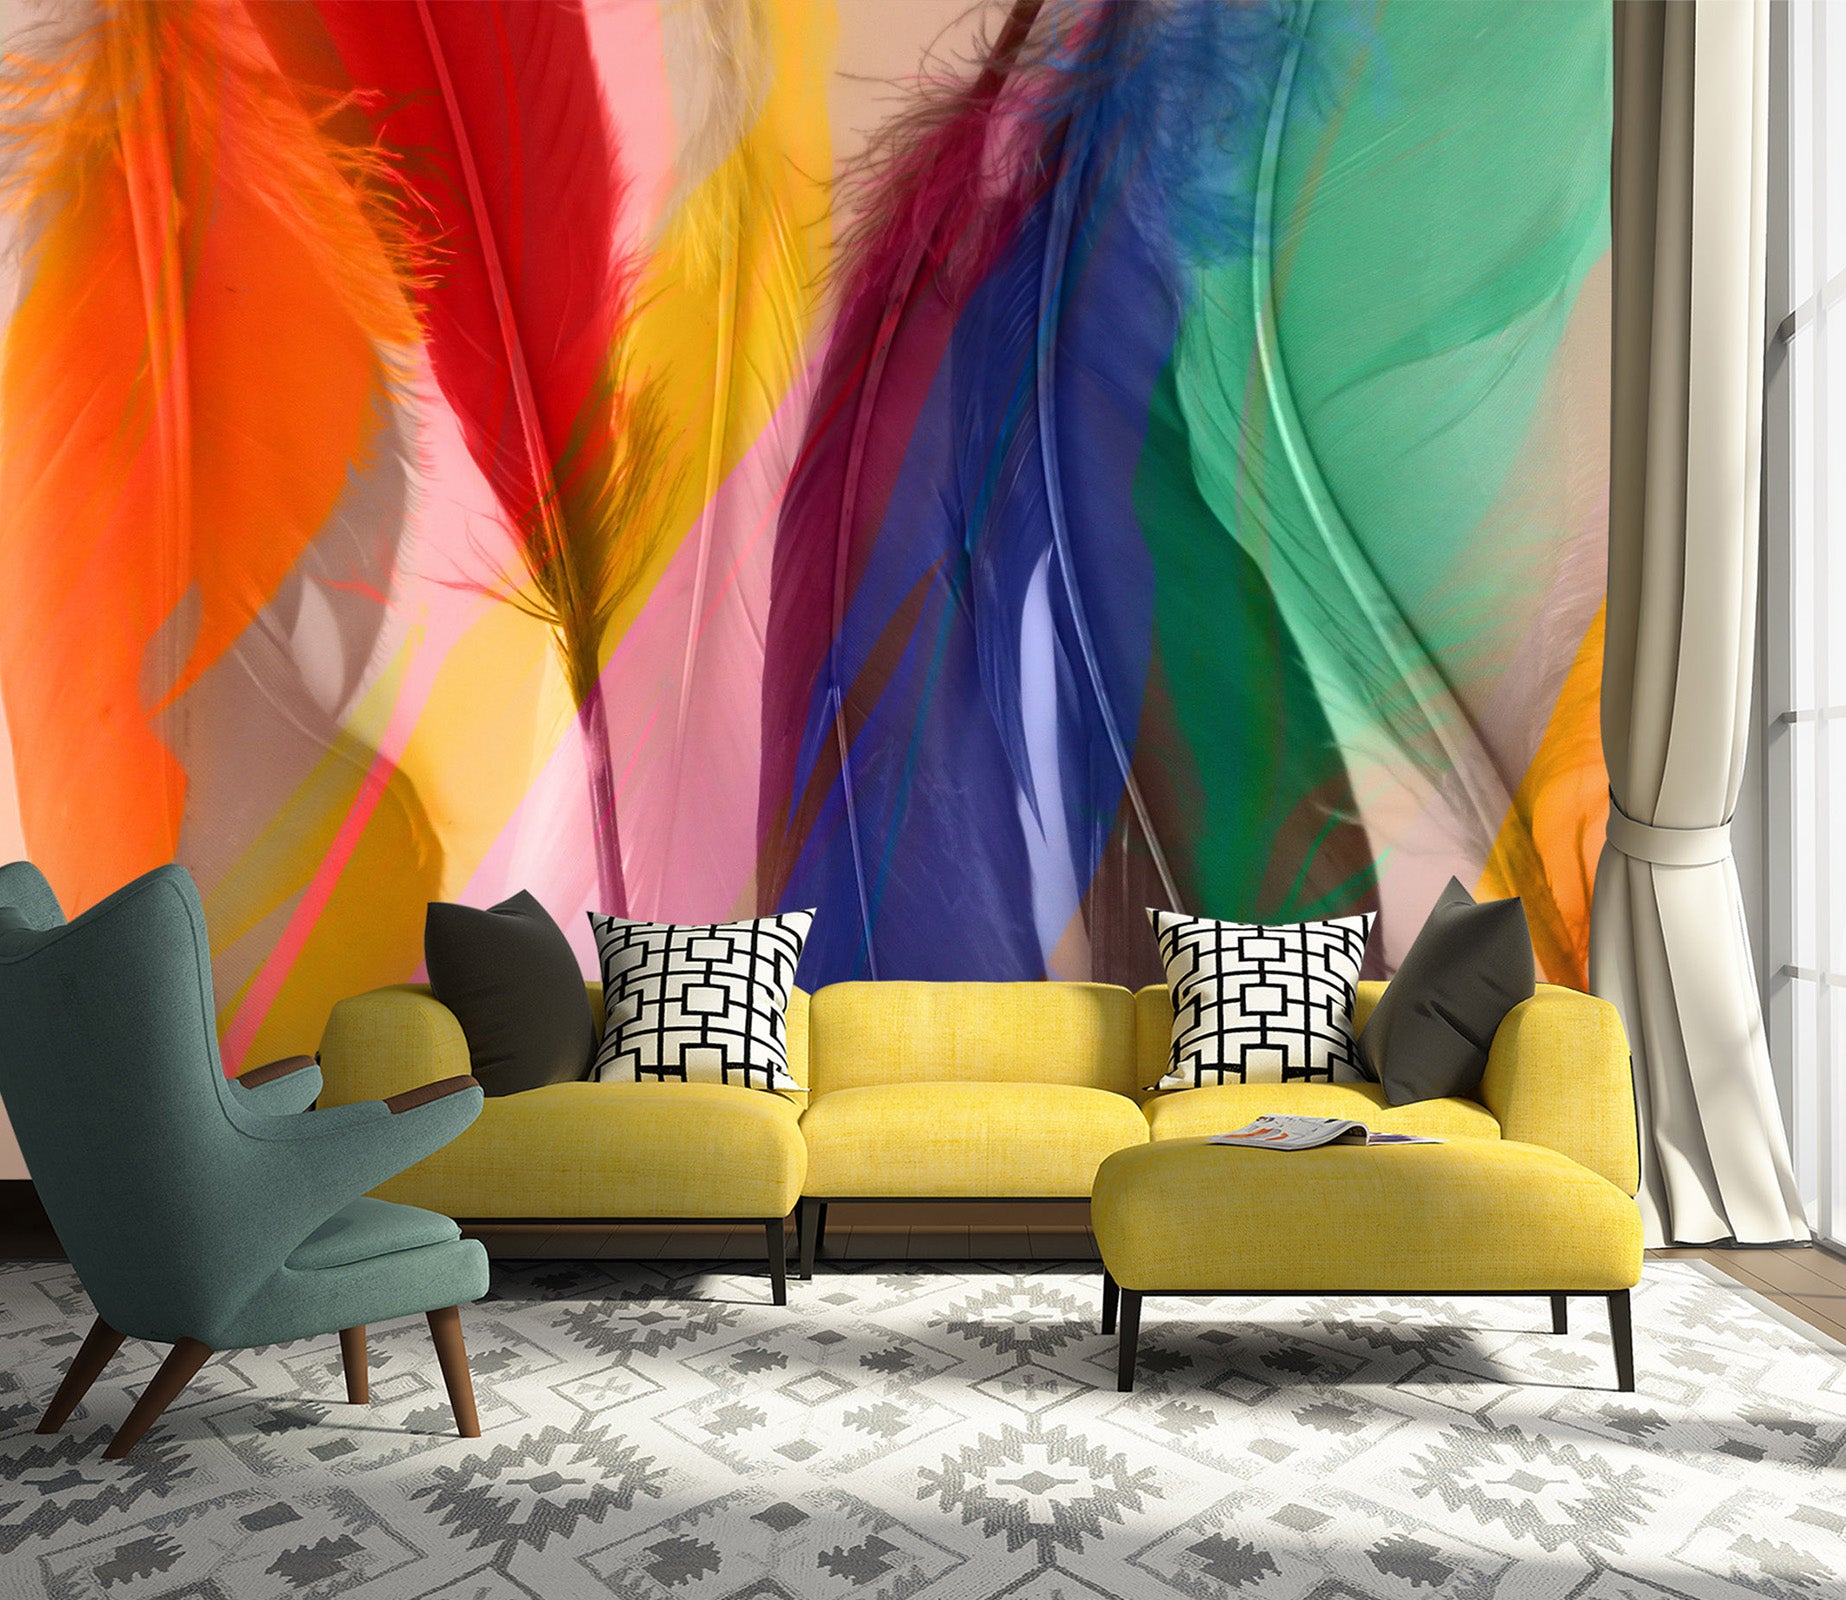 3D Colored Feathers 71081 Shandra Smith Wall Mural Wall Murals